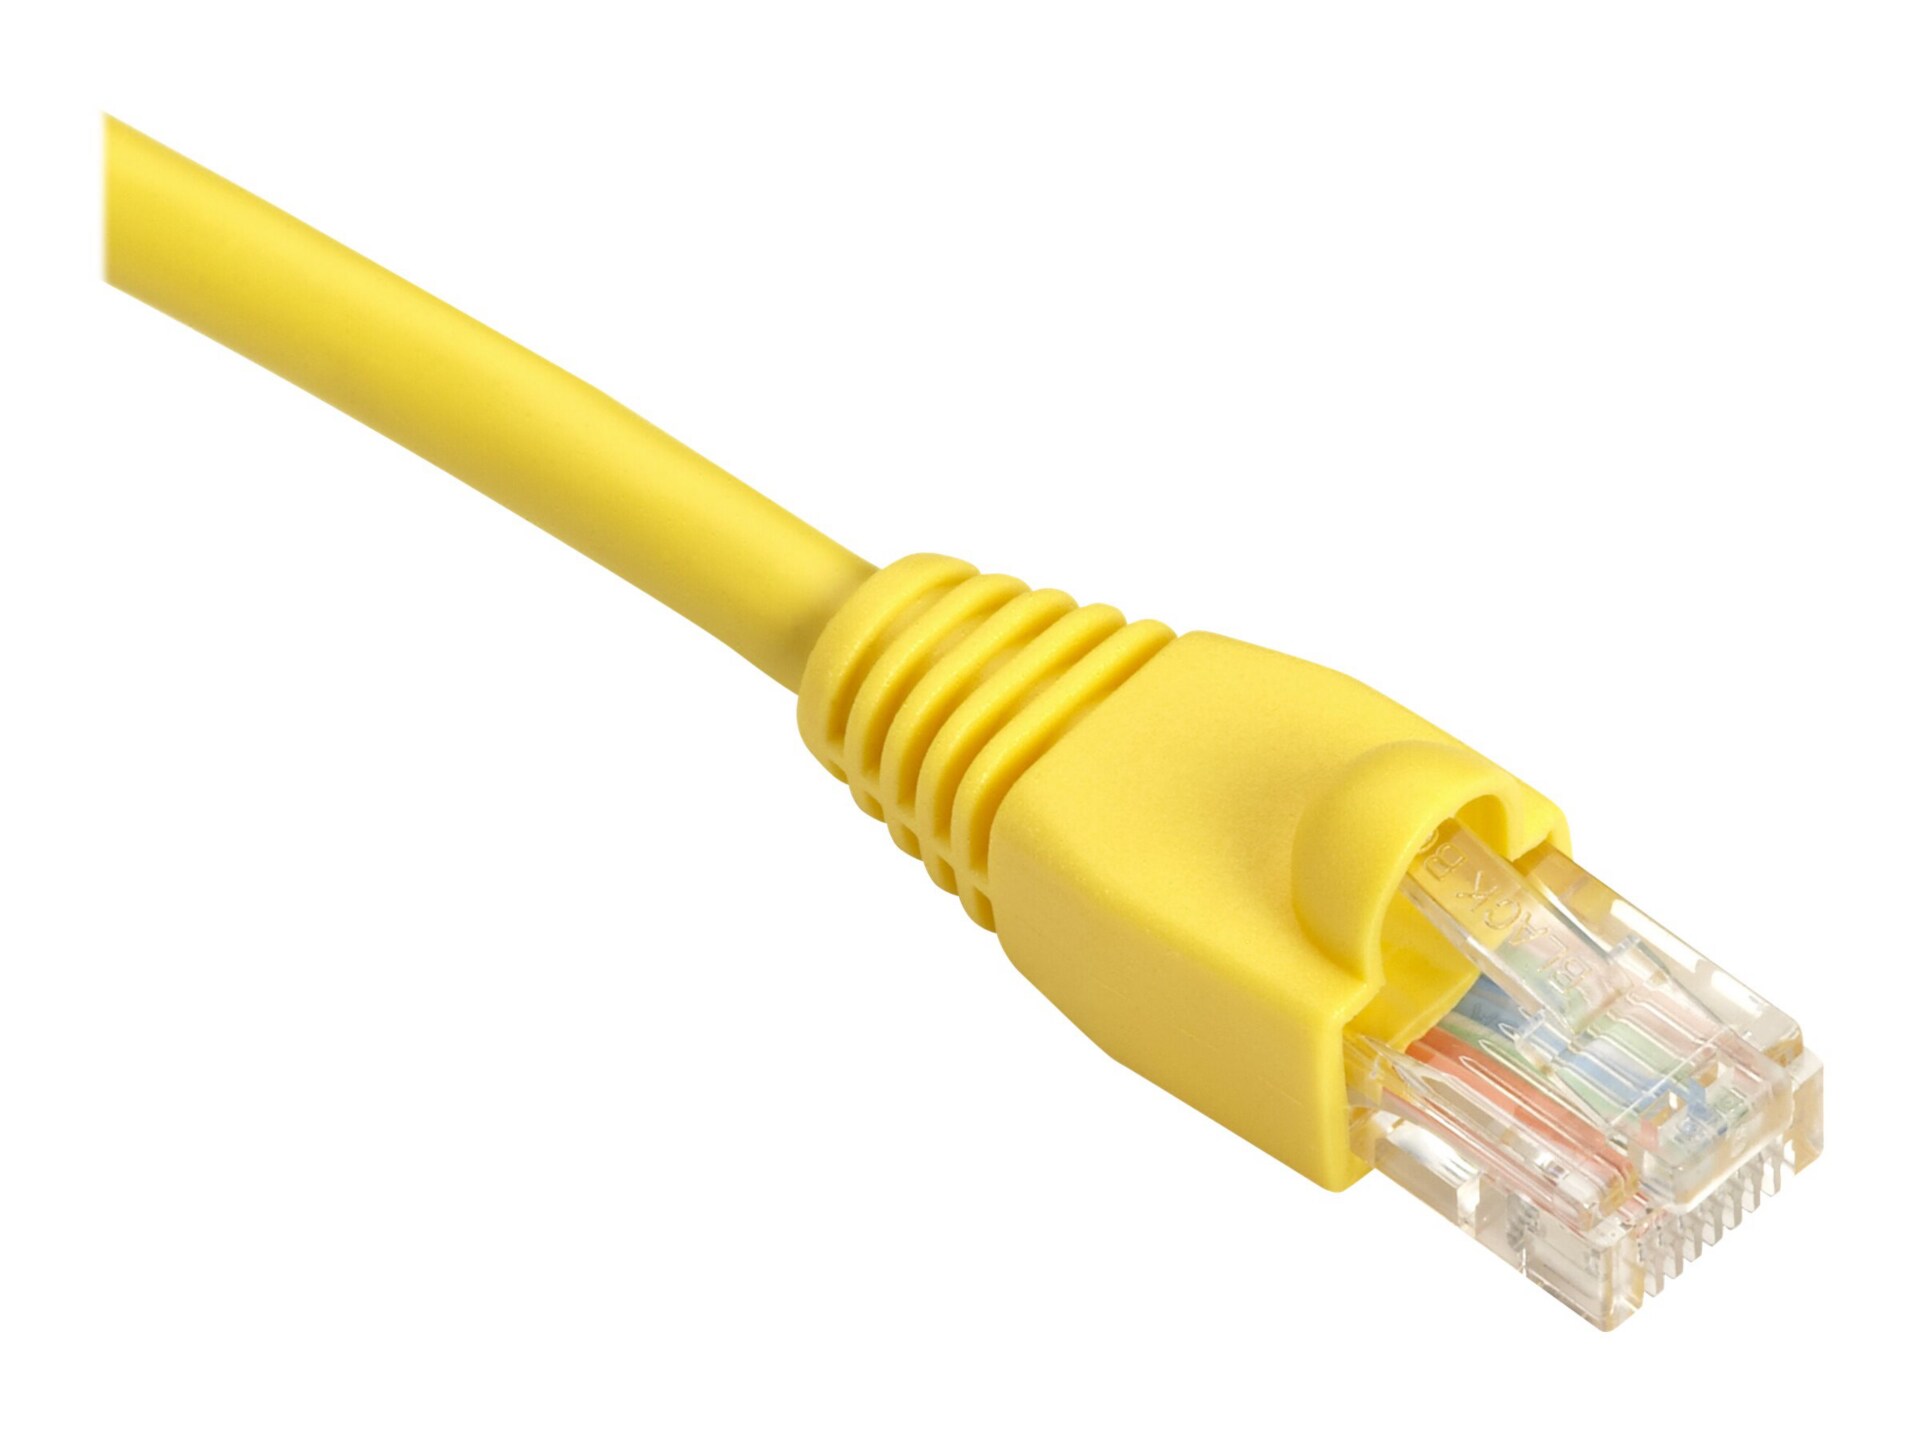 Black Box SpaceGAIN Reduced-Length - patch cable - 22.9 cm - yellow